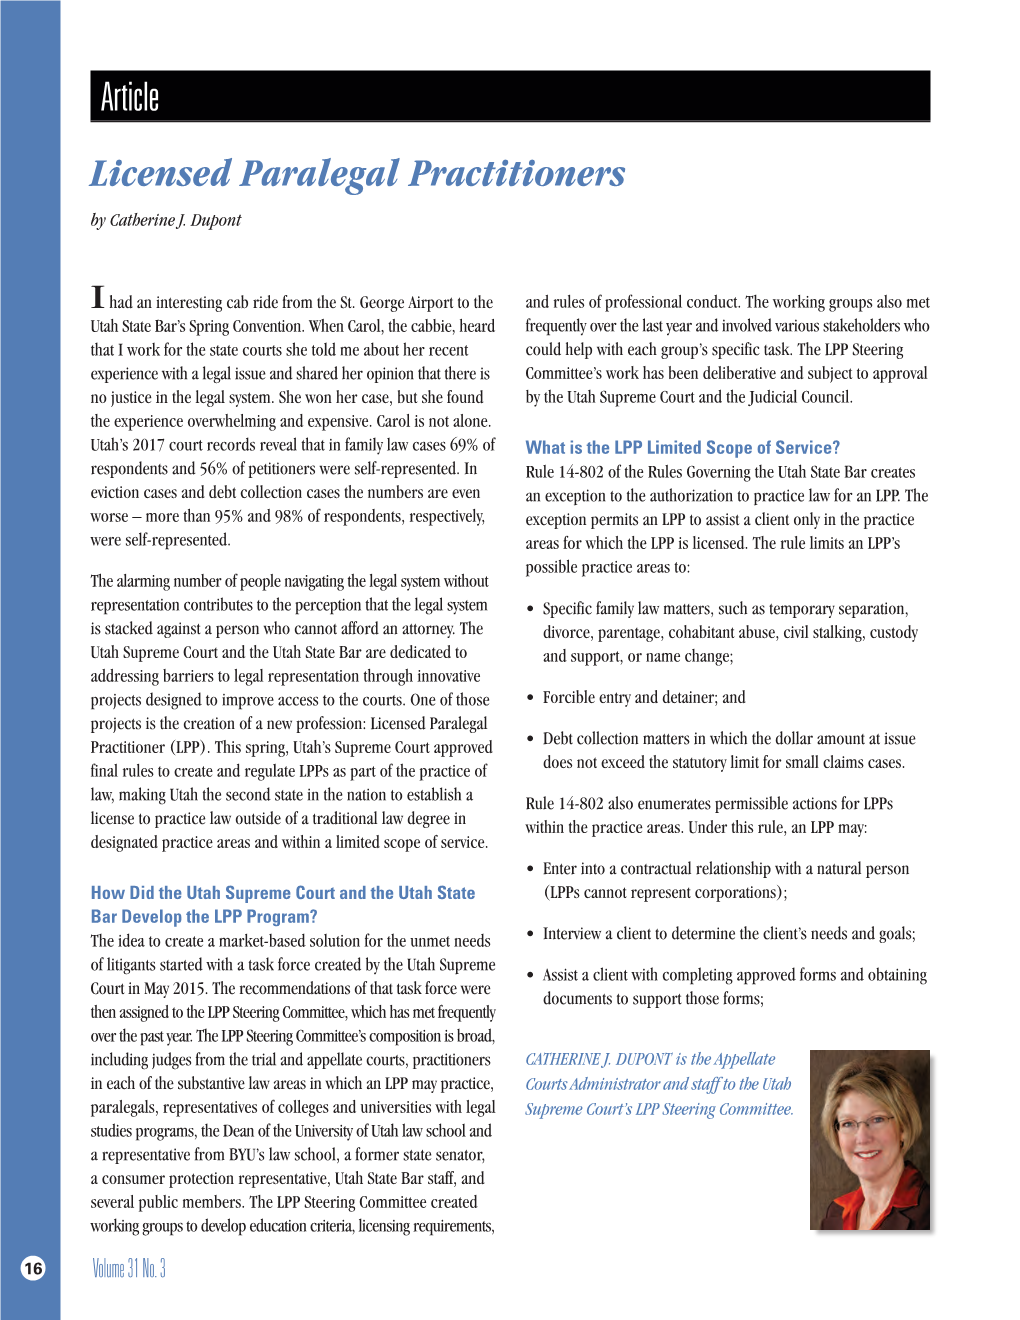 Article Licensed Paralegal Practitioners by Catherine J